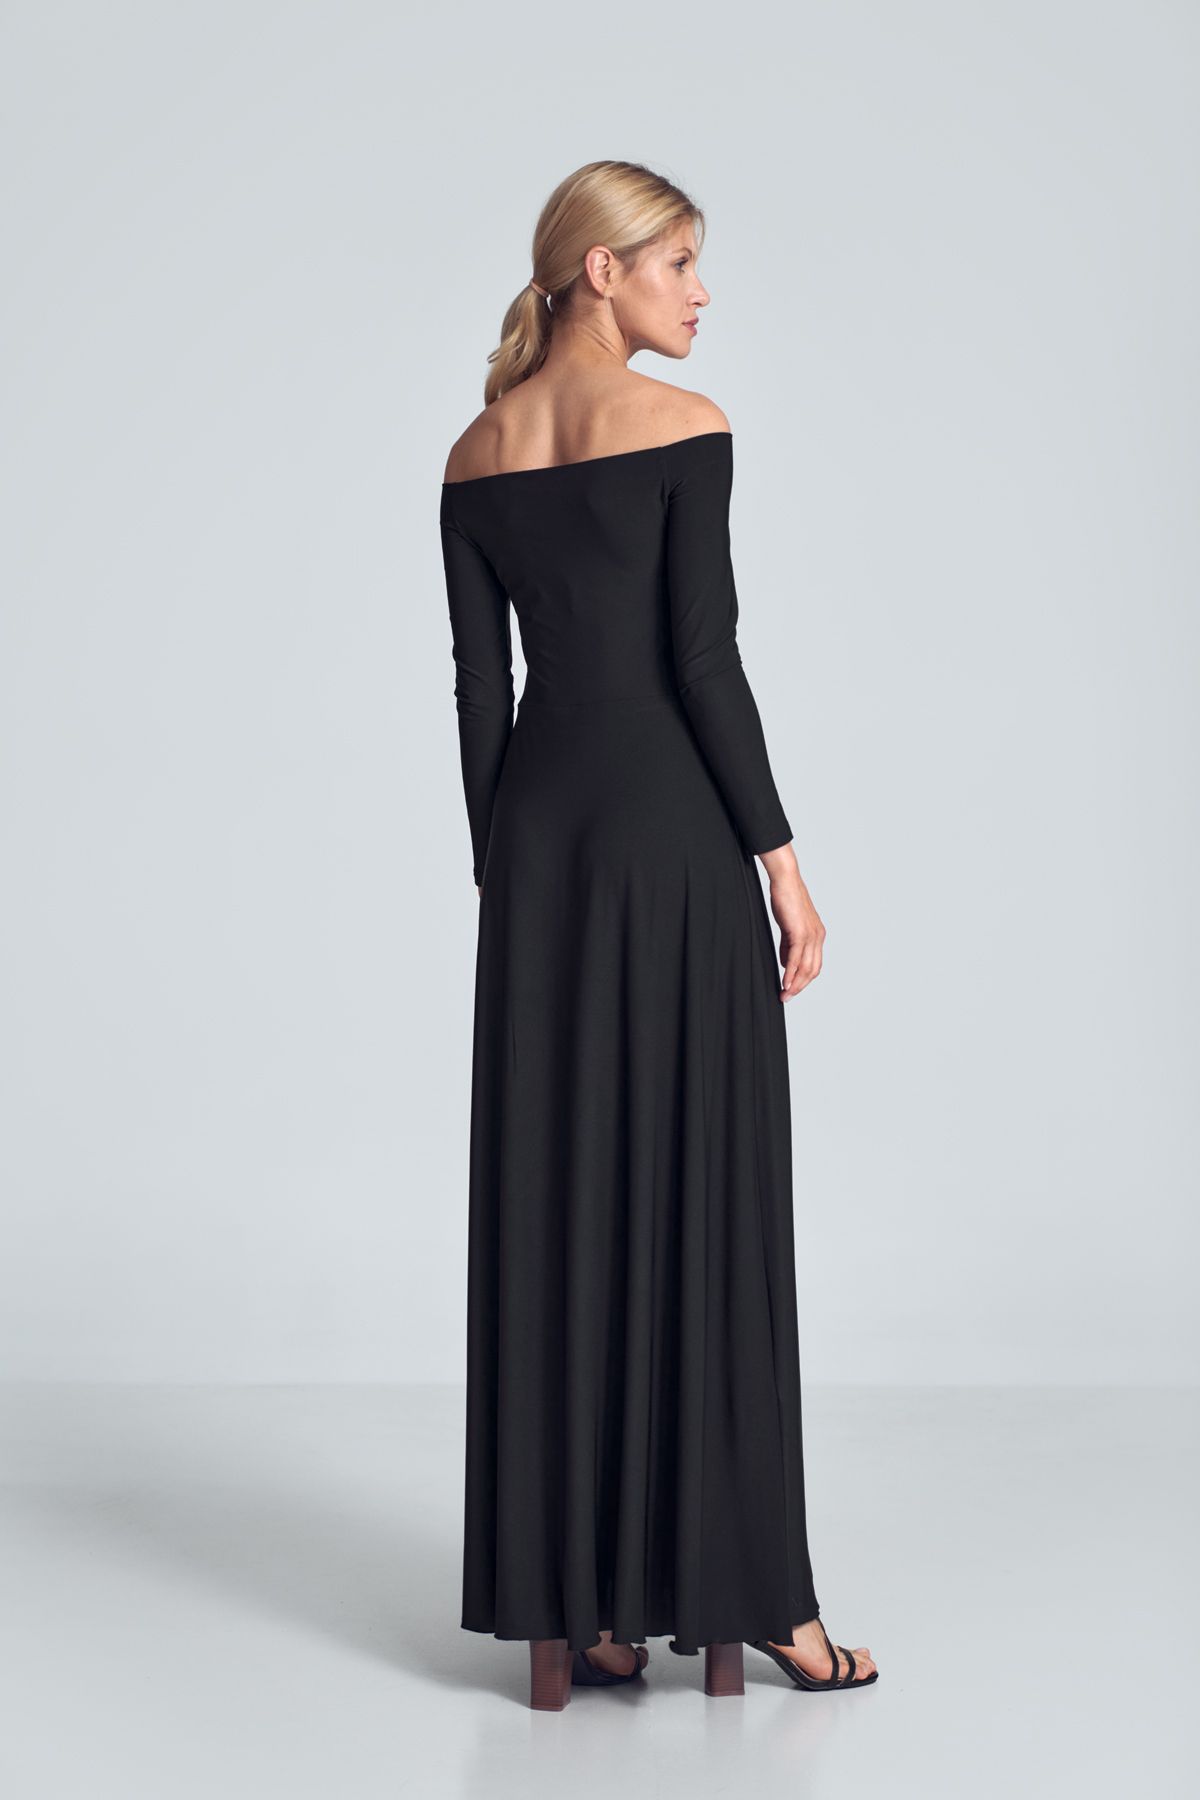 Black sensual maxi dress with long sleeves, large neckline - cold shoulders, pleats at the bust, sewn at the waist.